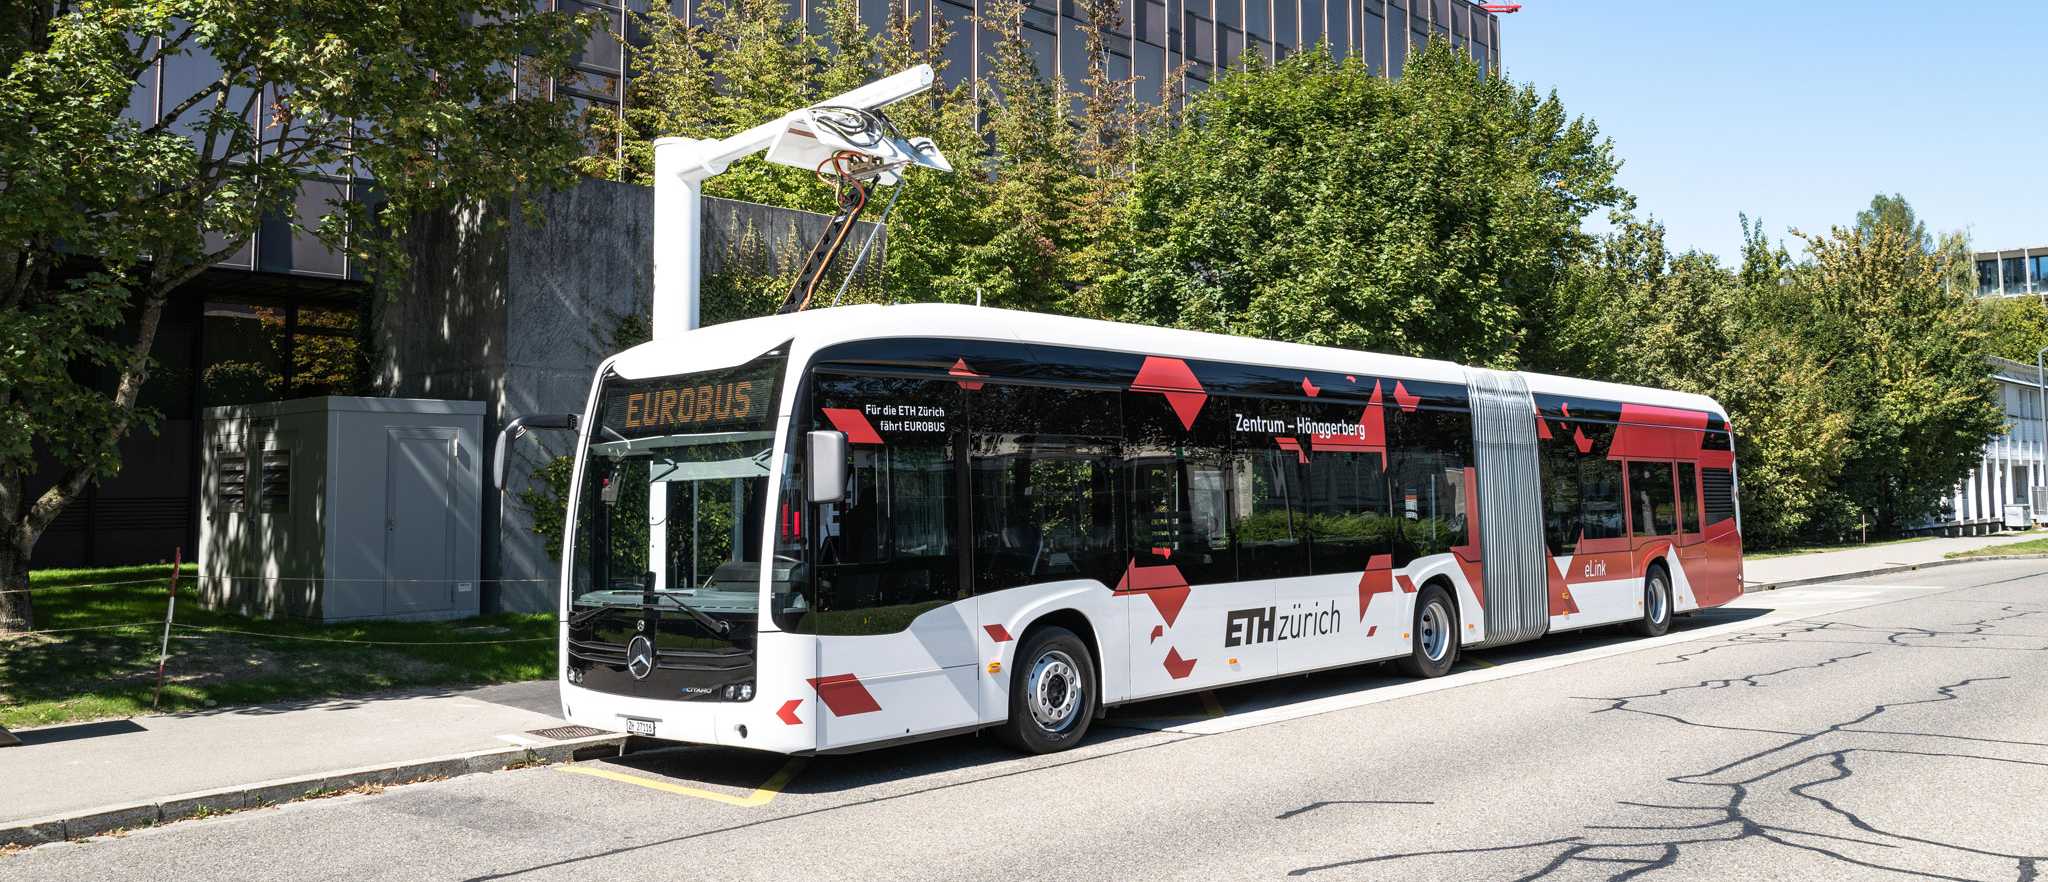 The ETH eLink shuttle bus during the charging process at ETH 365ֱ_365Ͷע-Ͷ Hönggerberg